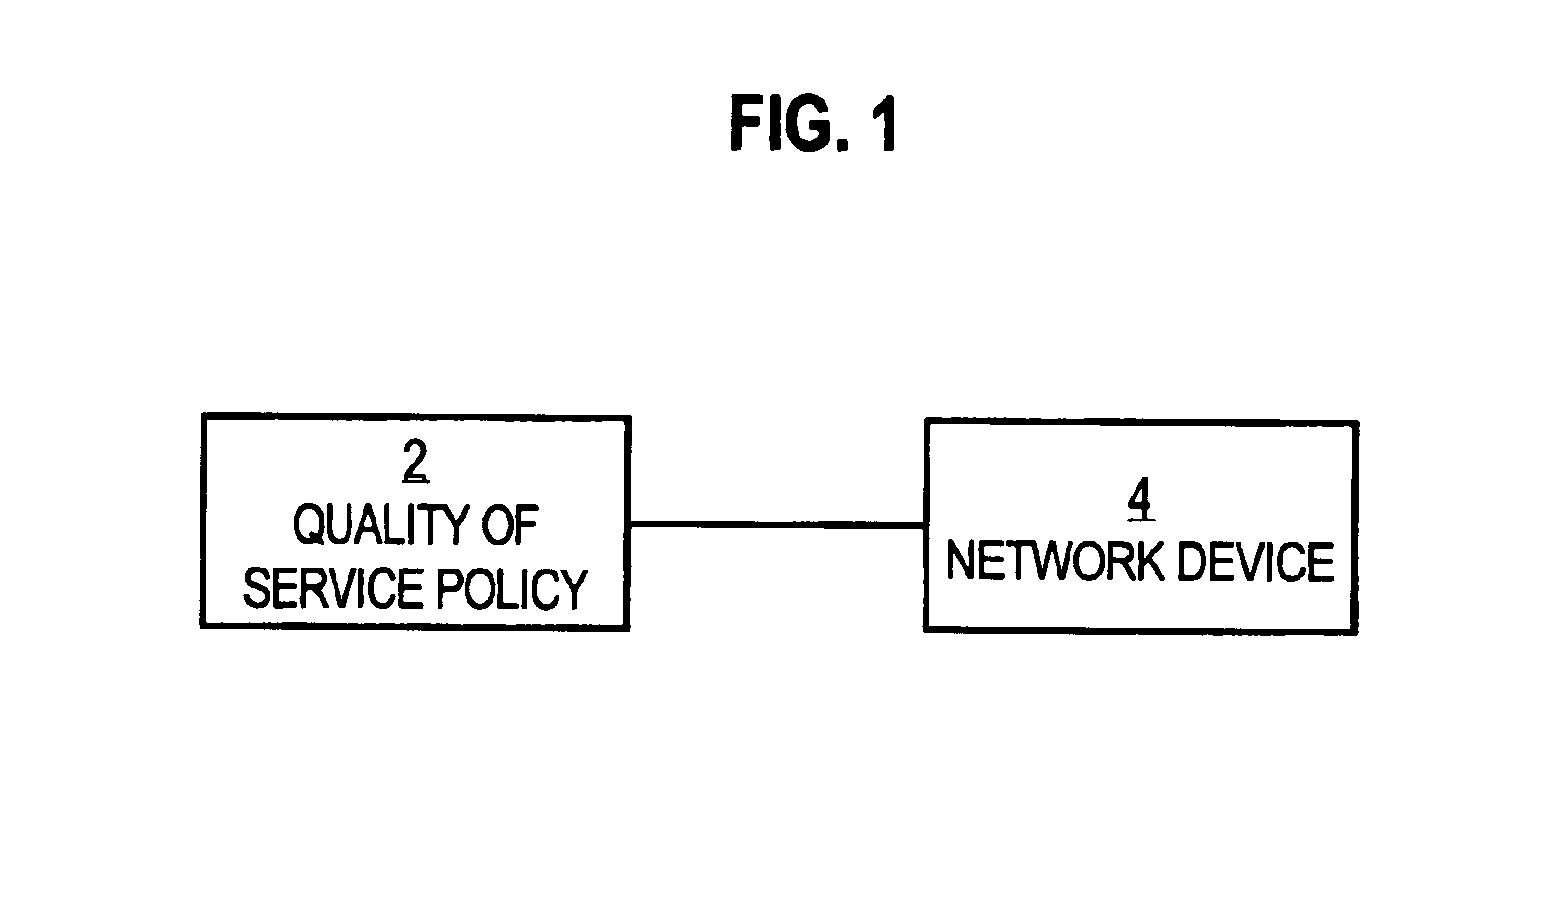 Basic command representation of quality of service policies